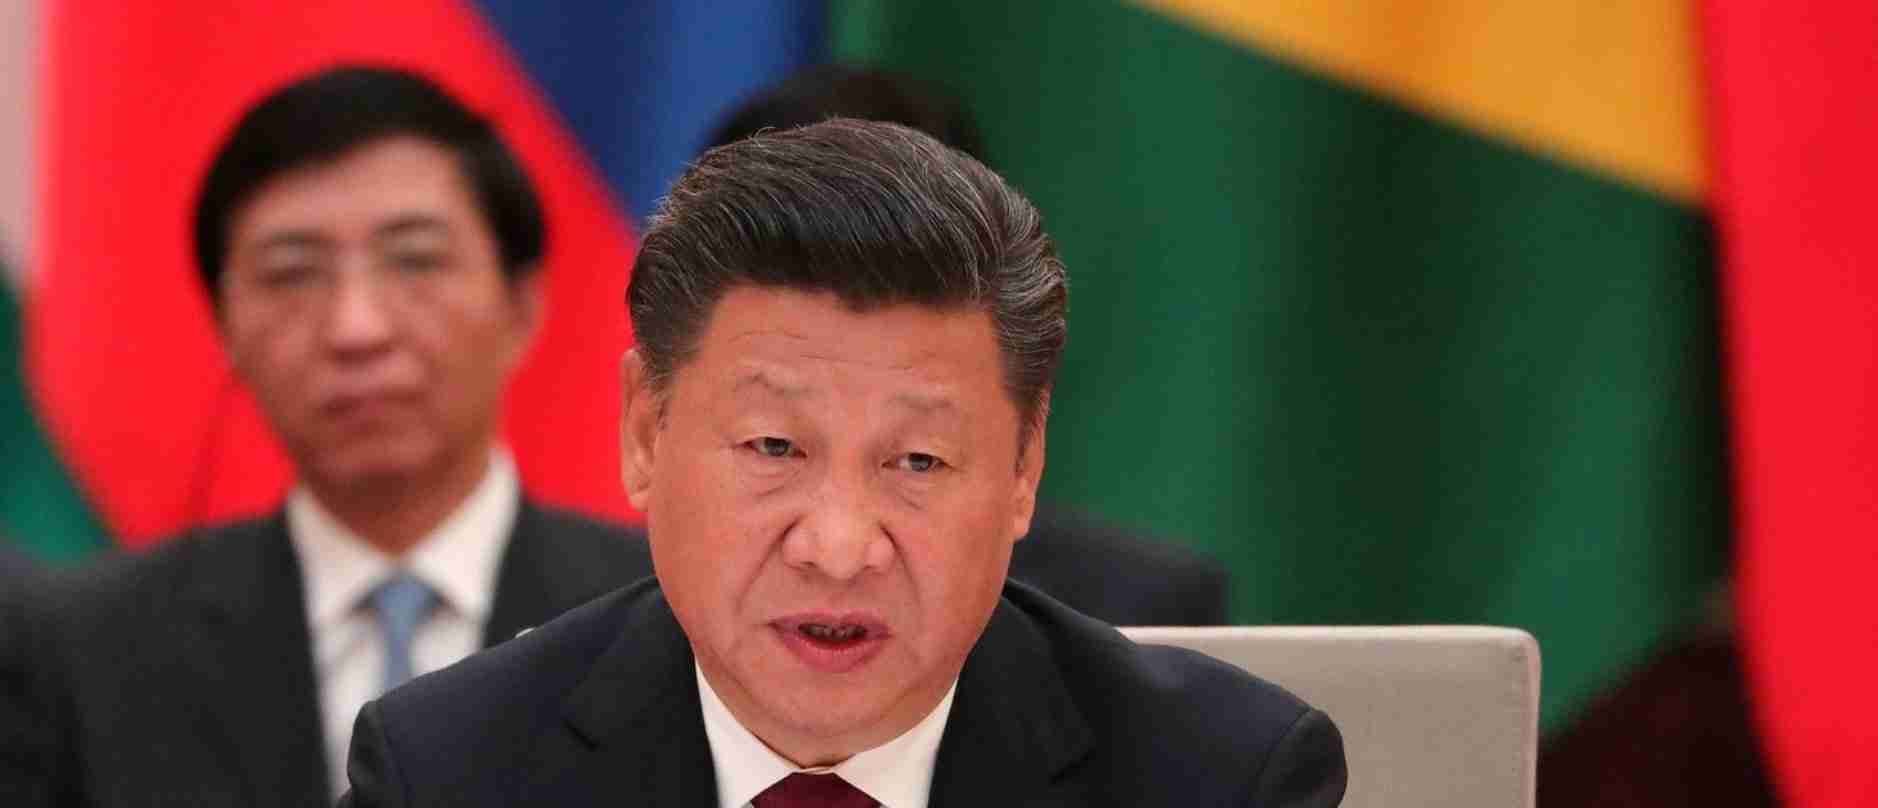 China Files - Exposing The Chinese Socialist and Communist Military Agenda and How Mr. Xi Became President